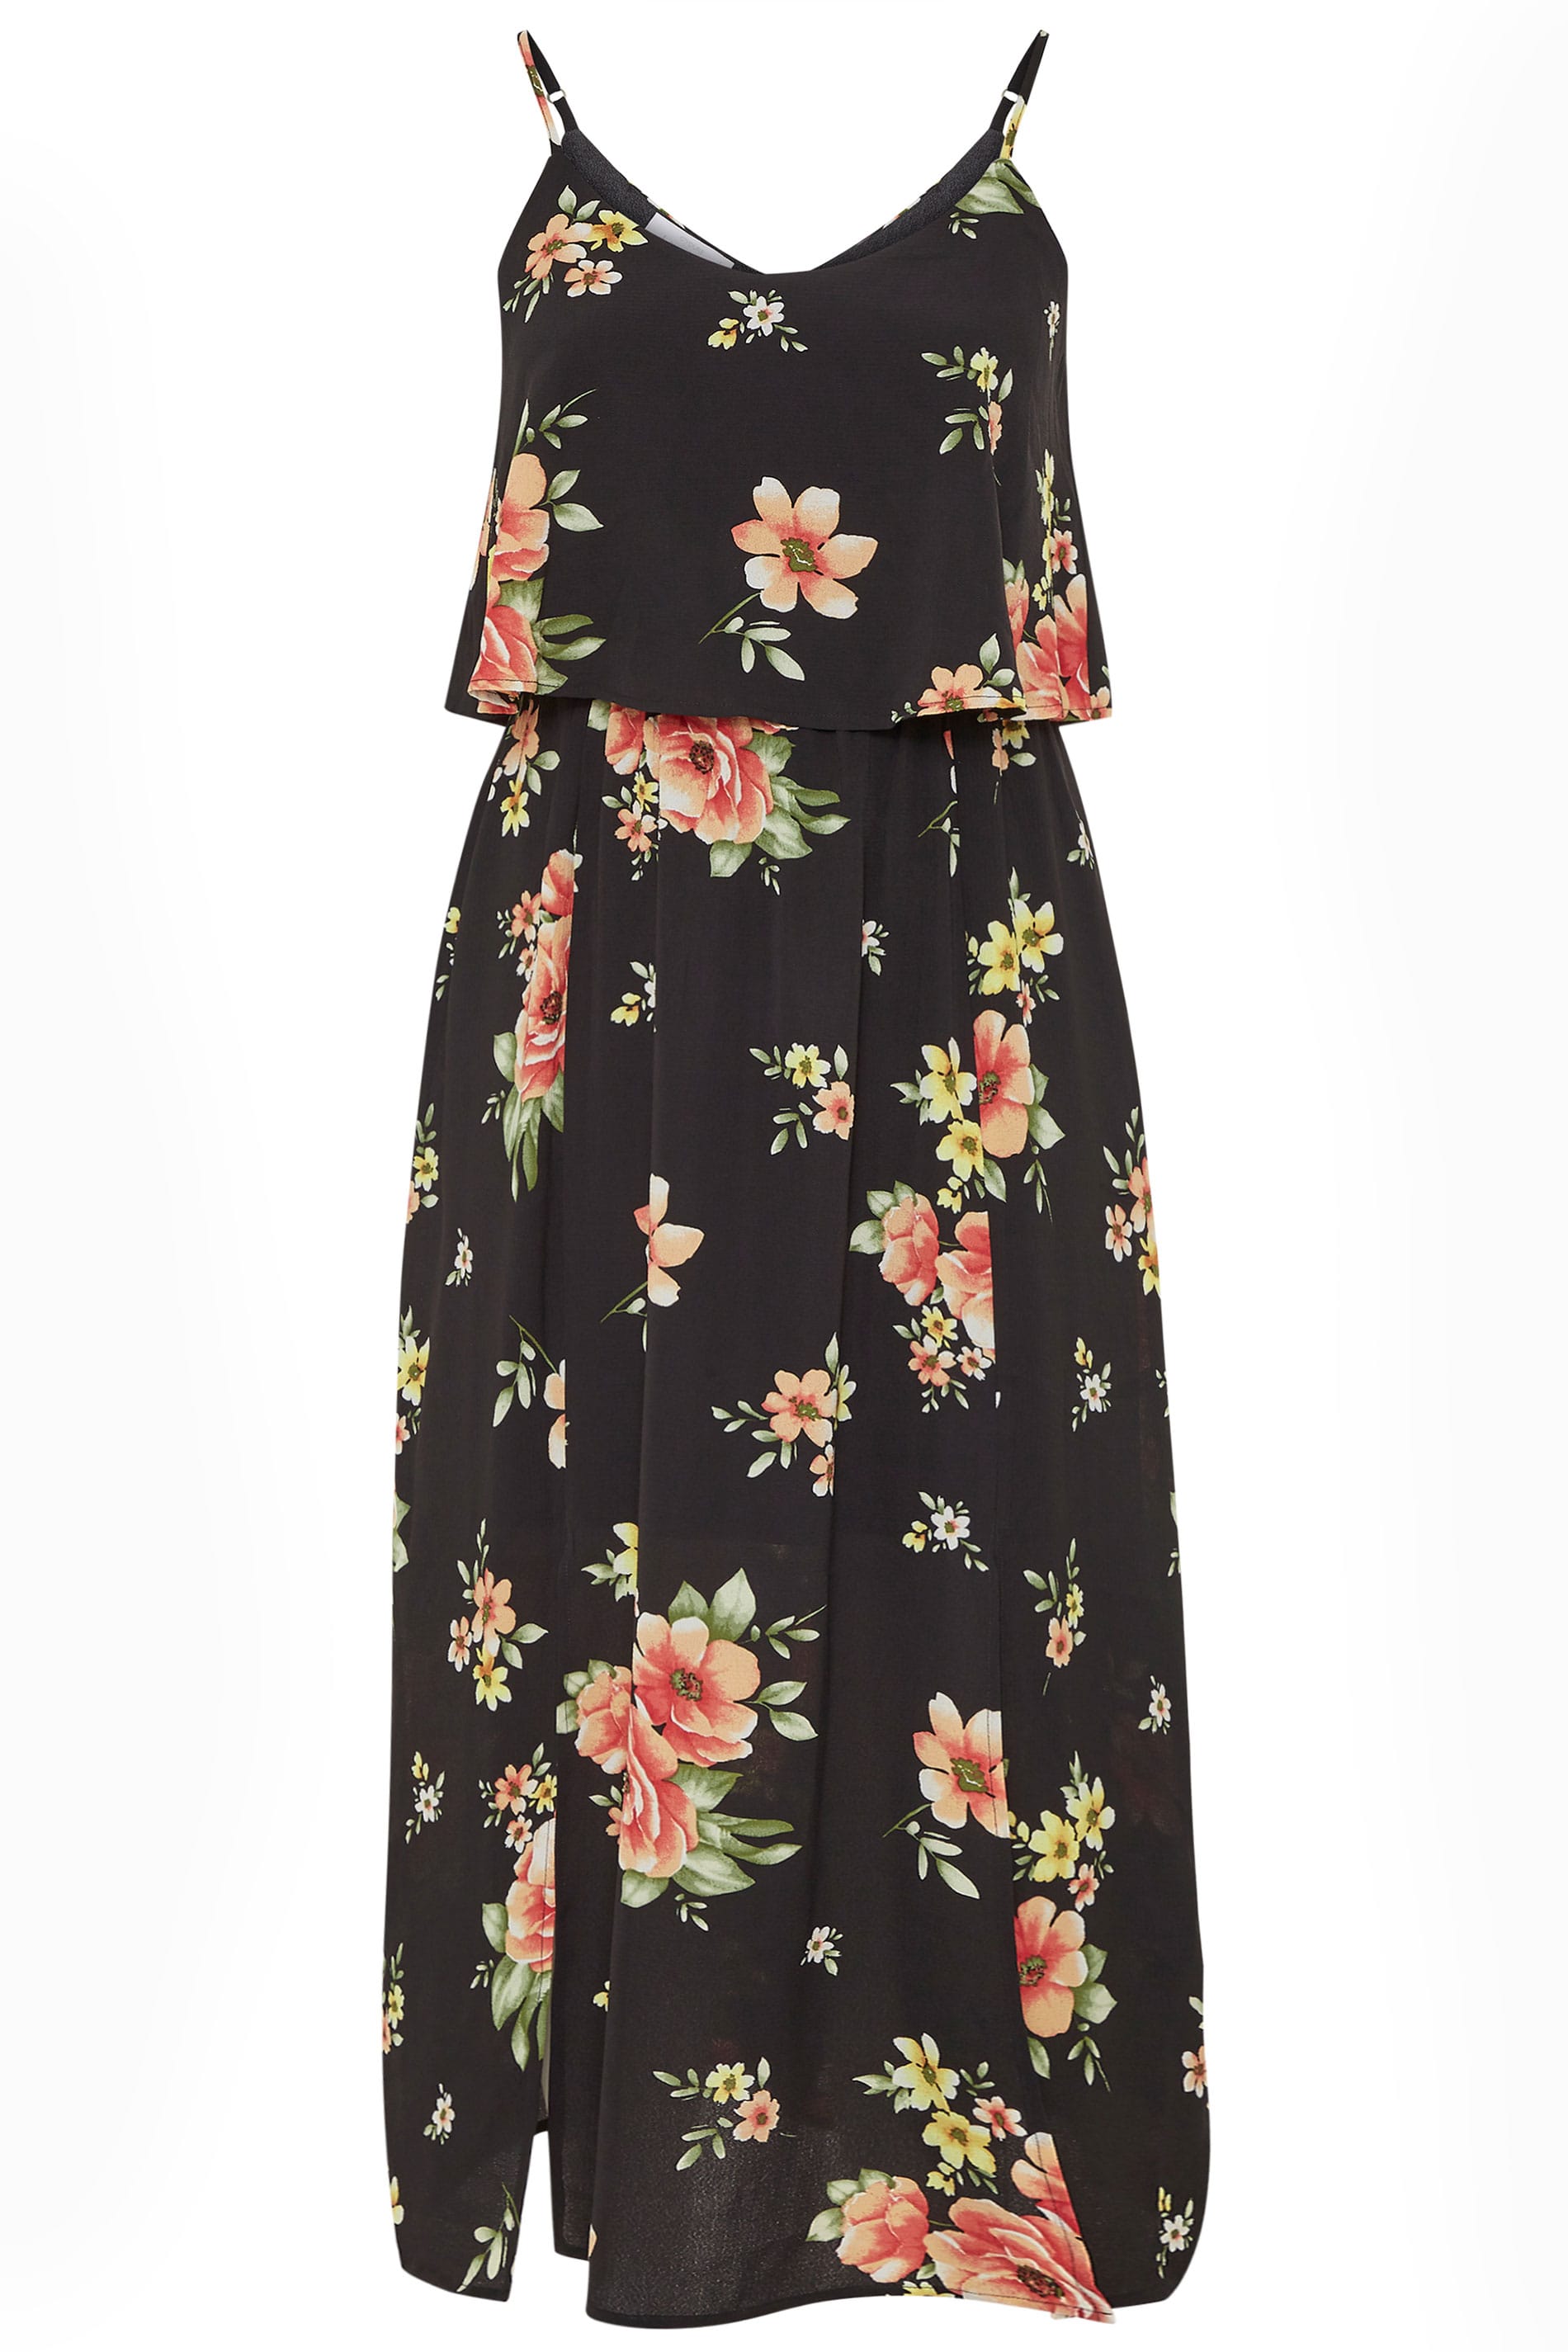 YOURS LONDON Black Floral Double Layer Maxi Dress | Yours Clothing